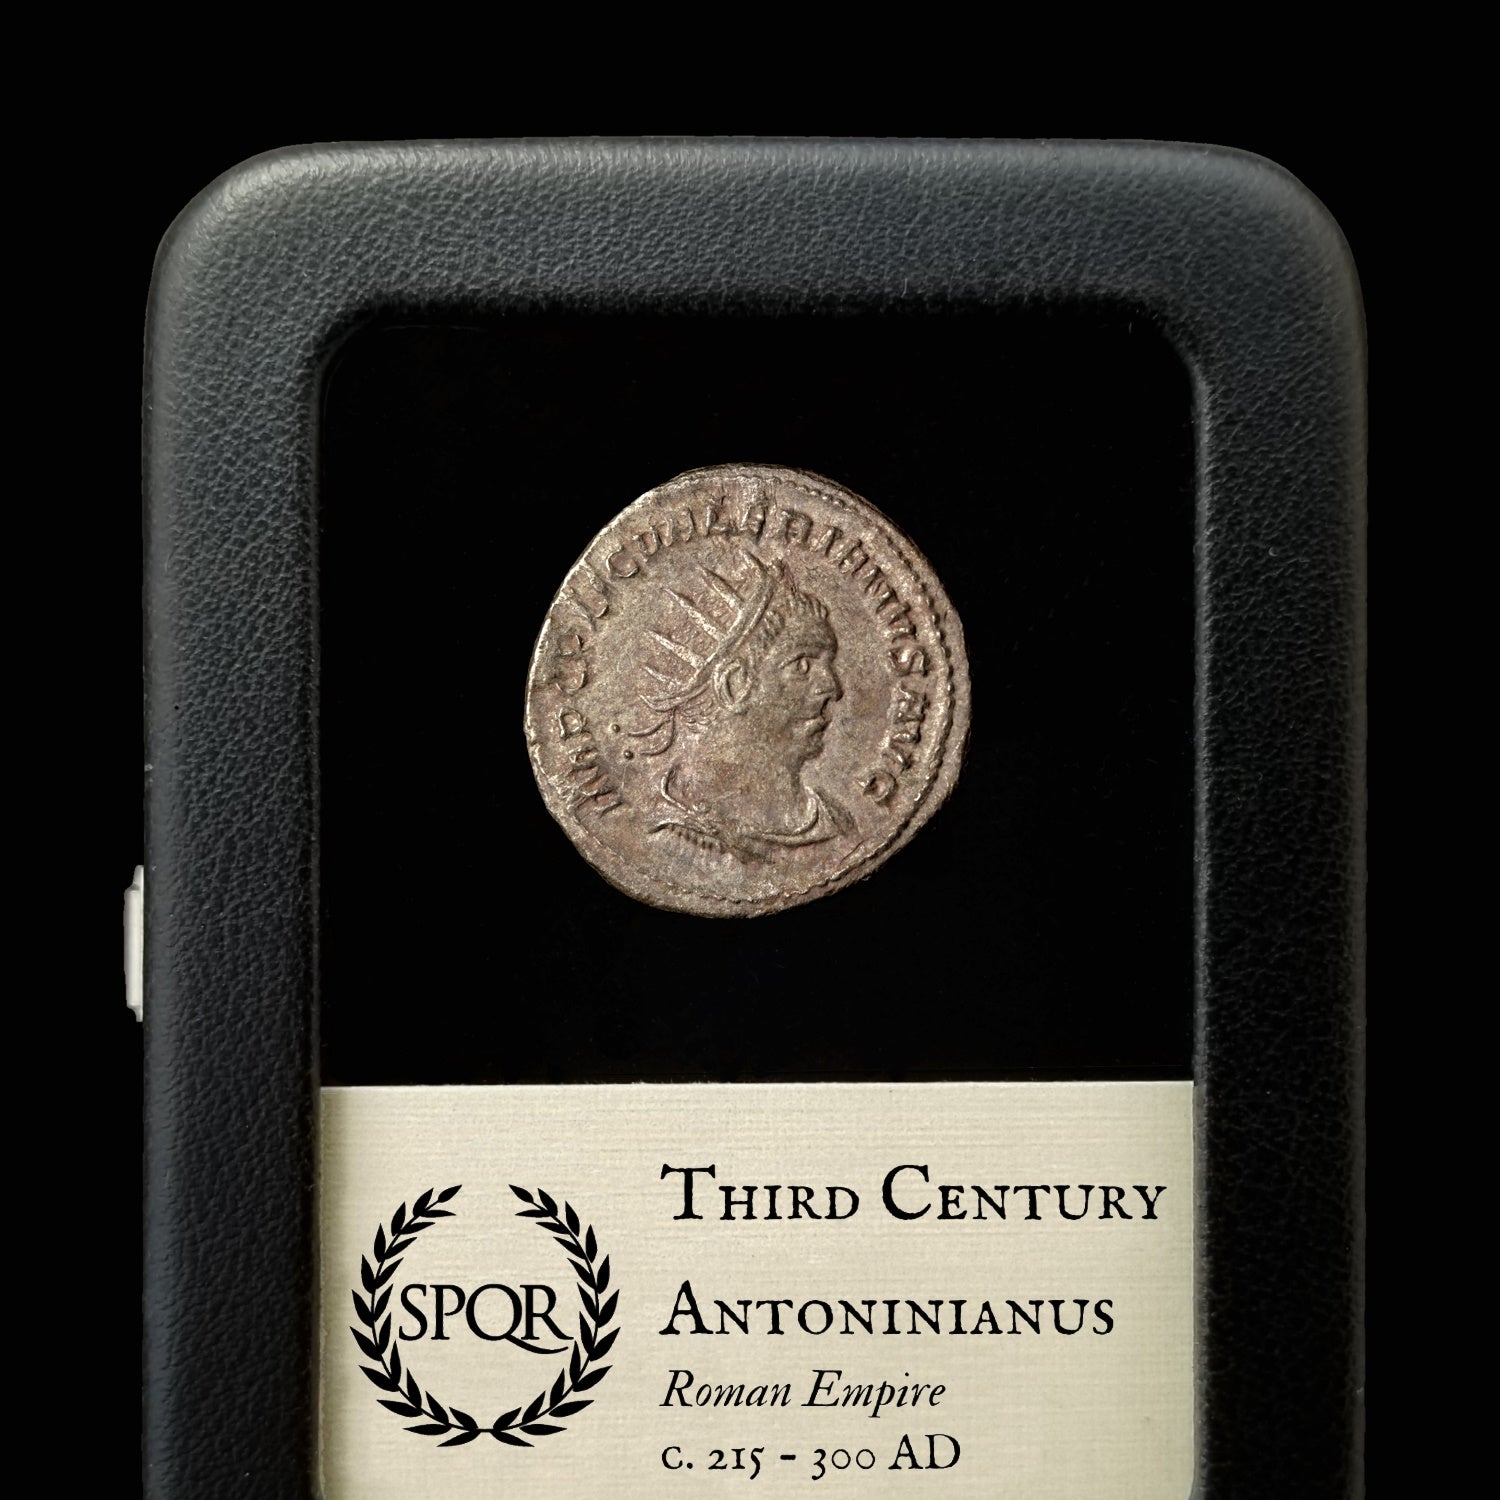 Rome, Early 3rd Cent. Antoninianus (30% silver) - c. 215 to 300 CE - Roman Empire